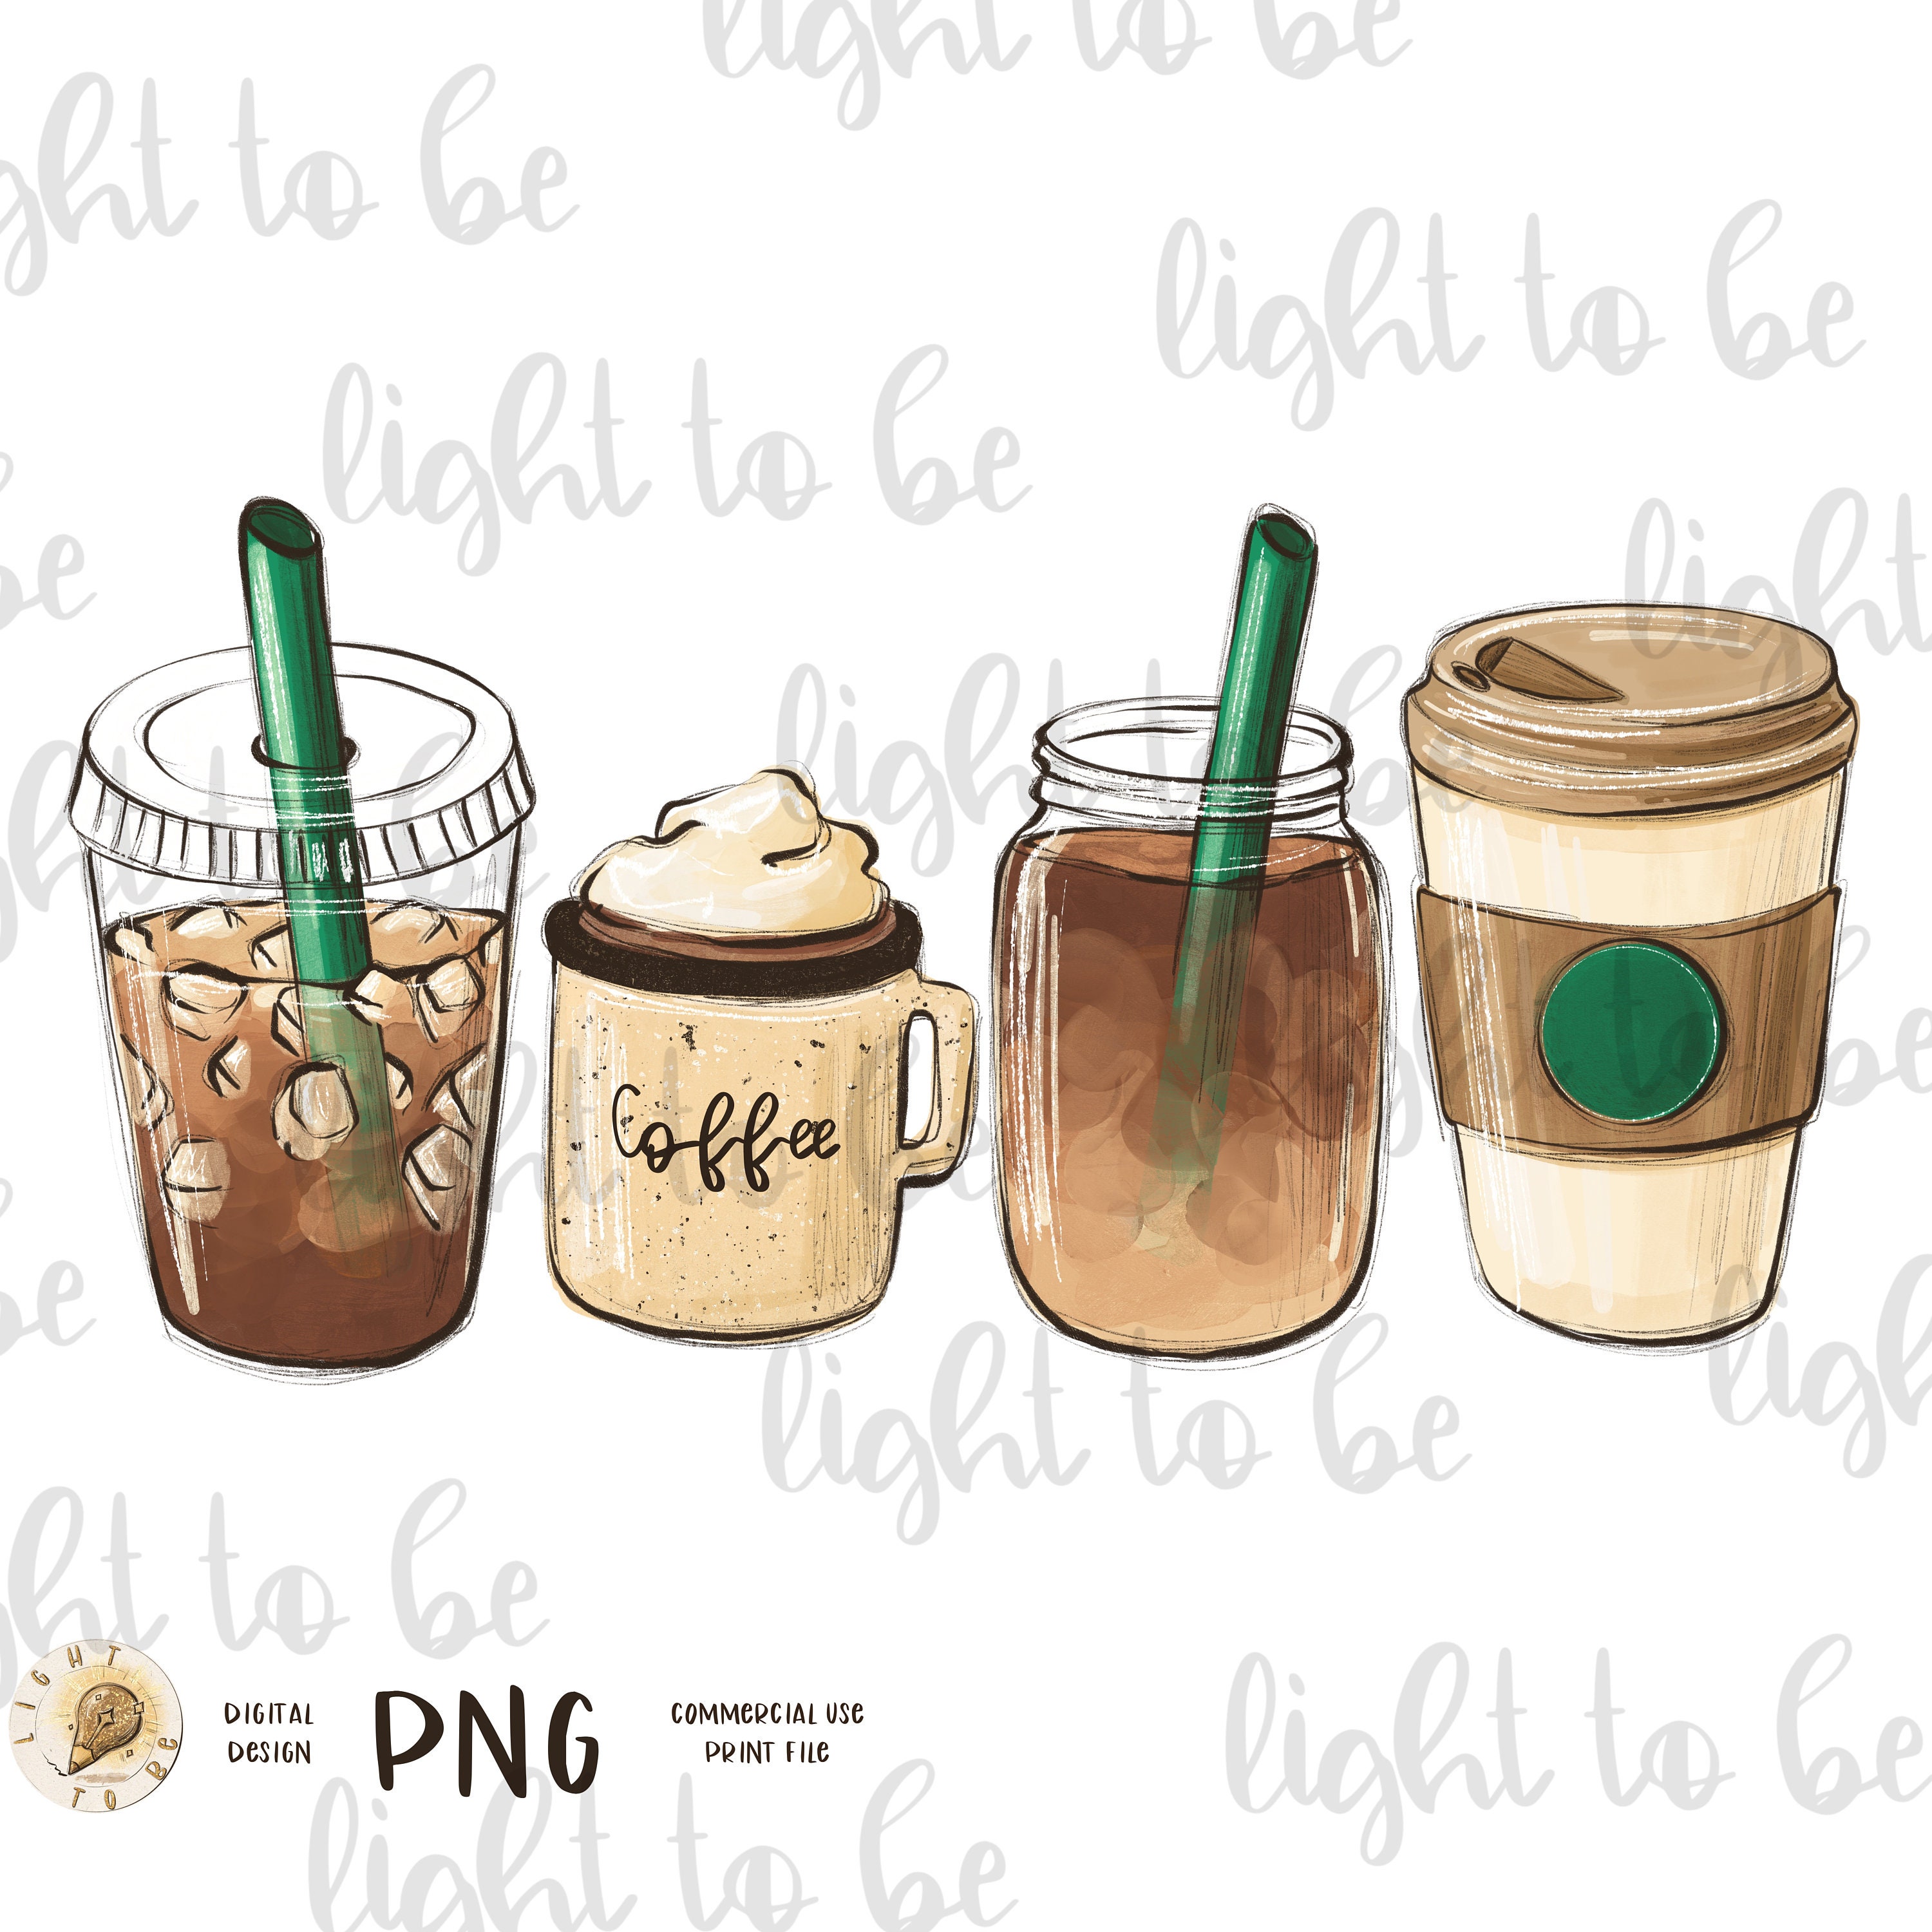 Starbucks' New Frapuccinos and Cookie Straws — KRISTIE HANG